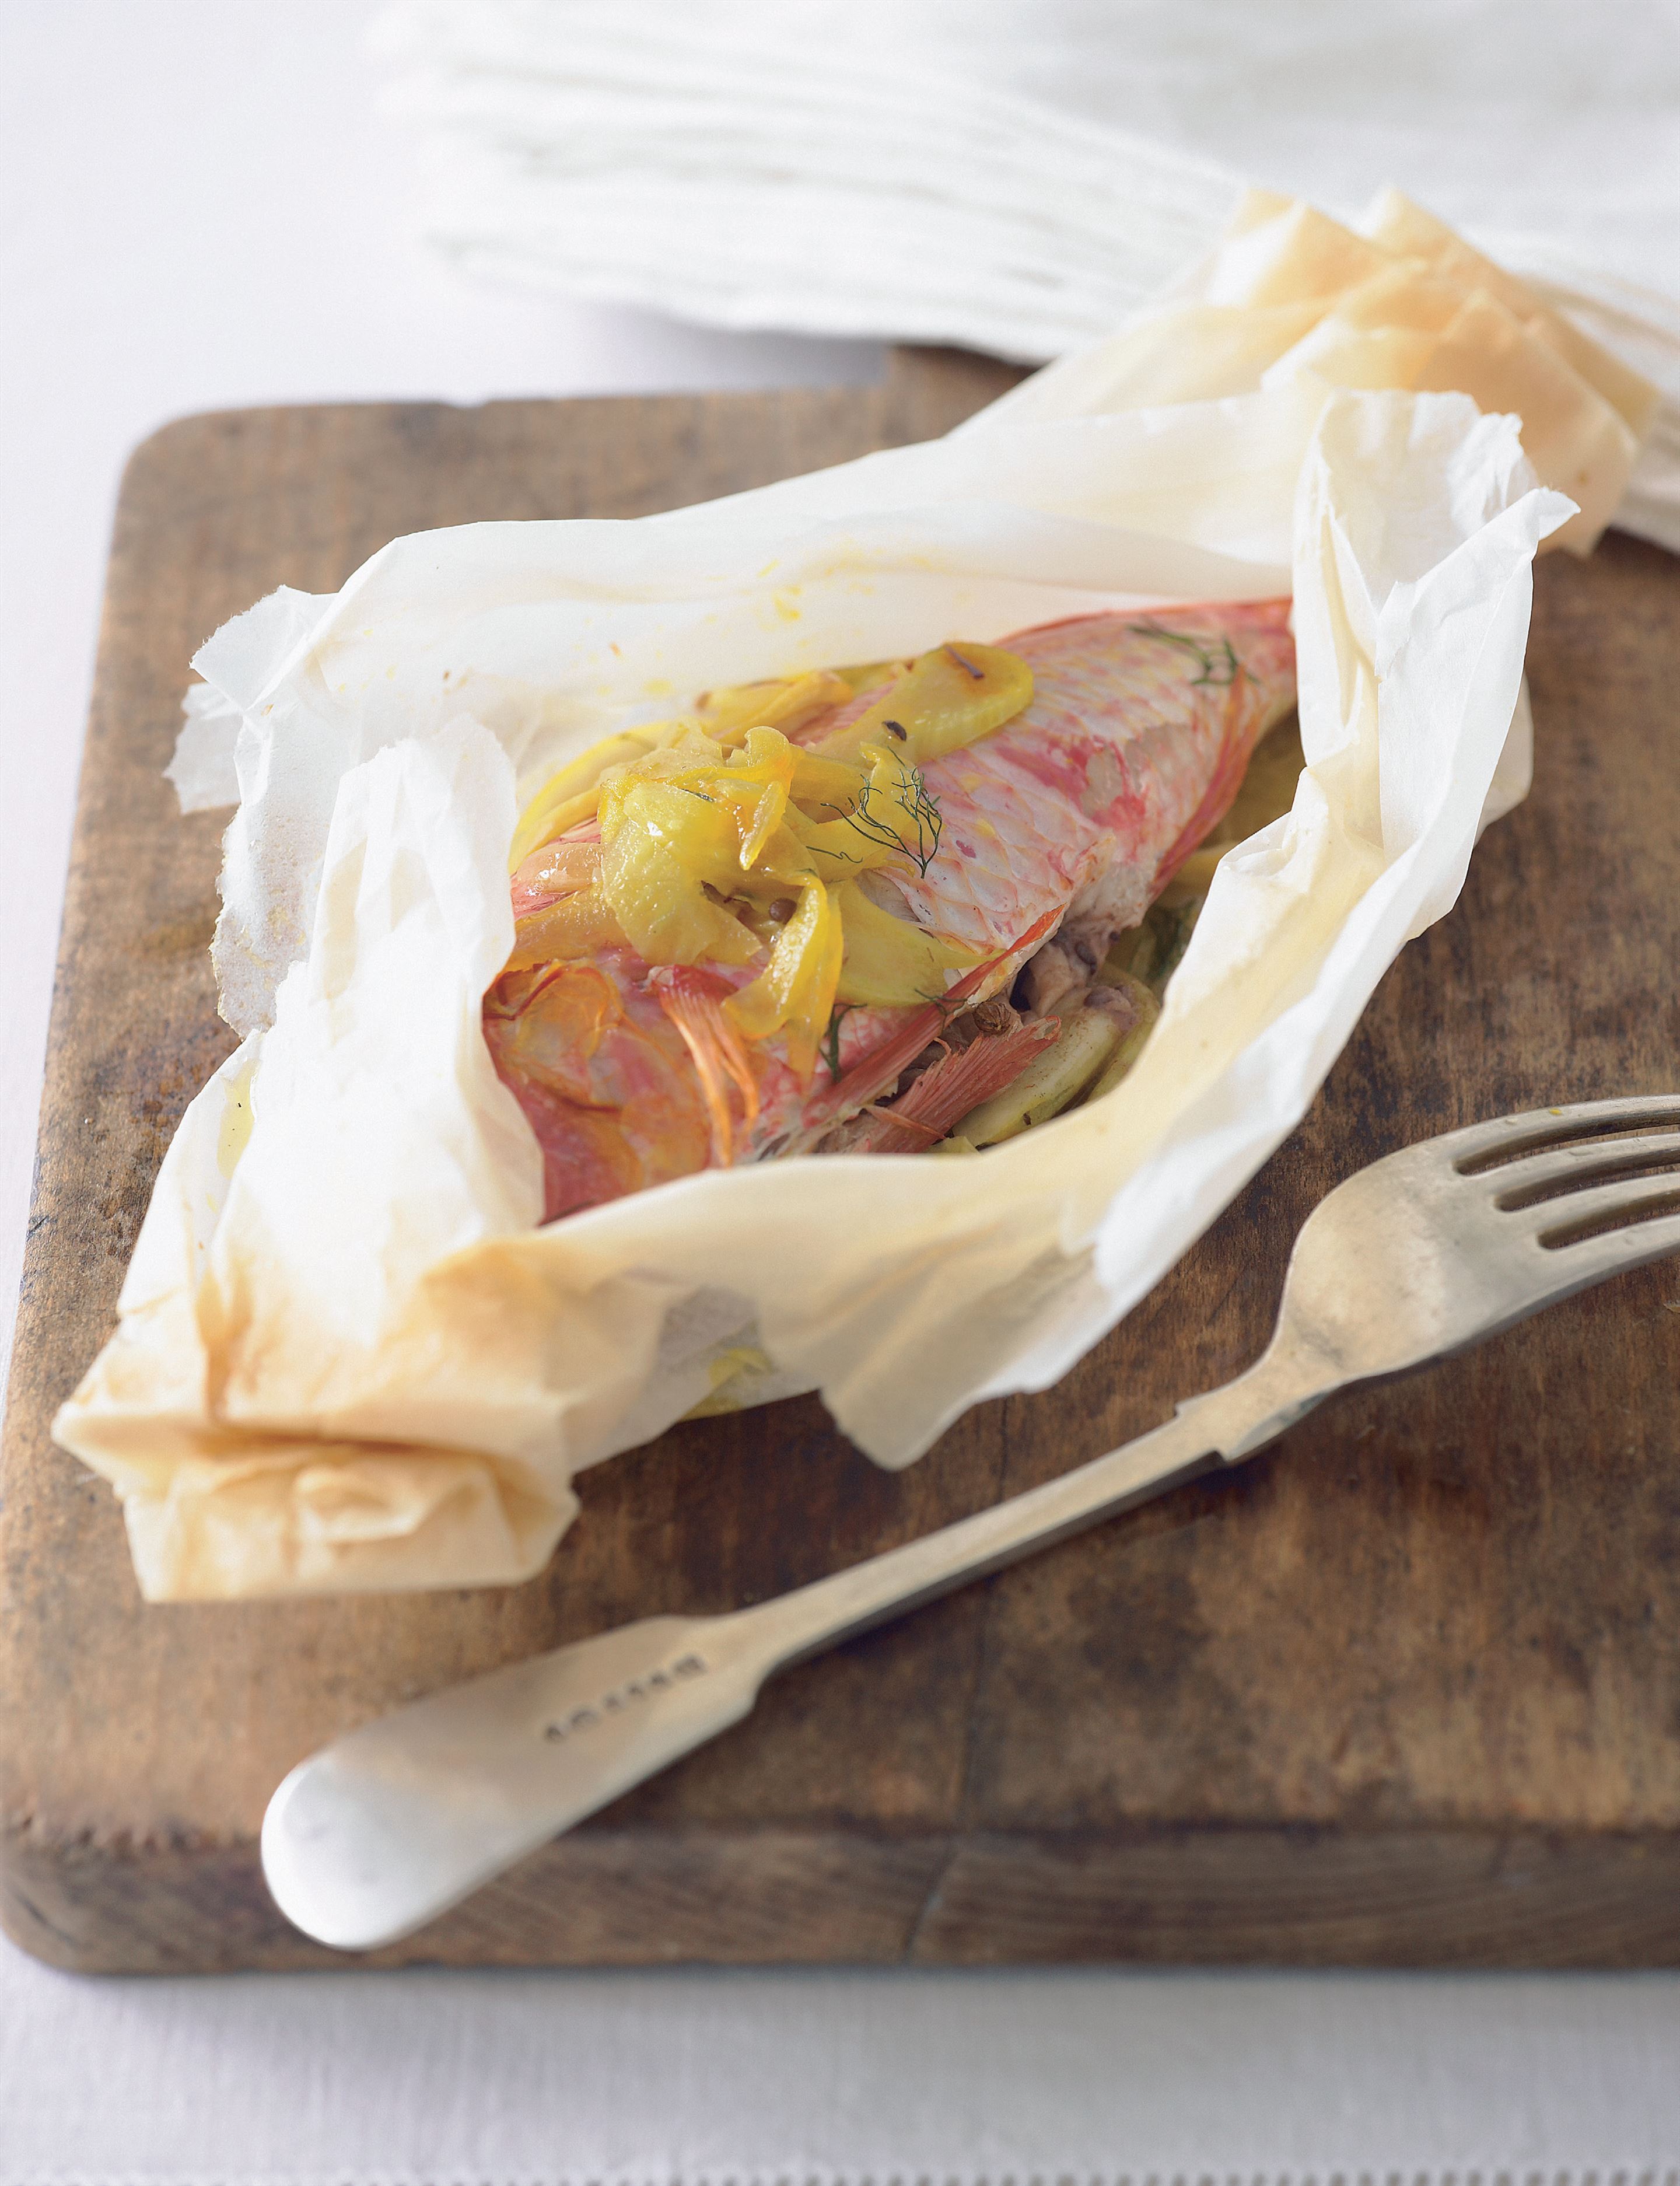 Red mullet ‘en papillote’ with fennel and aromatics